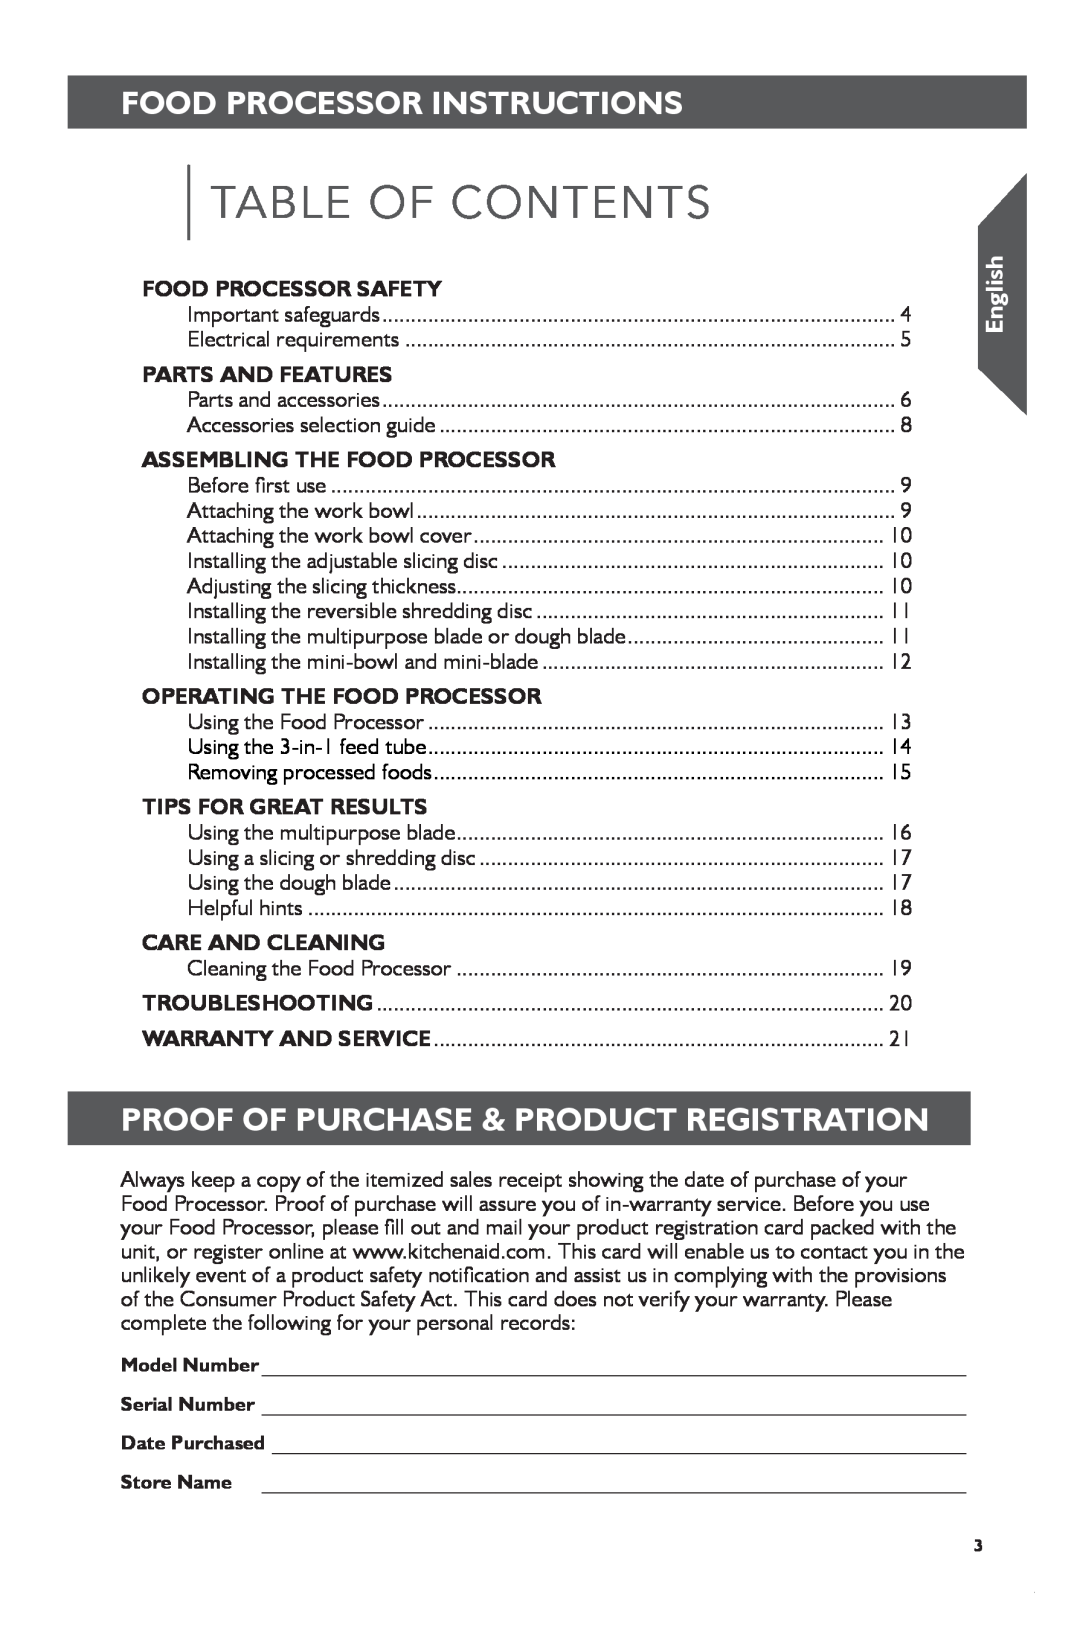 KitchenAid KFP1133 manual Table Of Contents, Proof Of Purchase & Product Registration, English, Food Processor Safety 